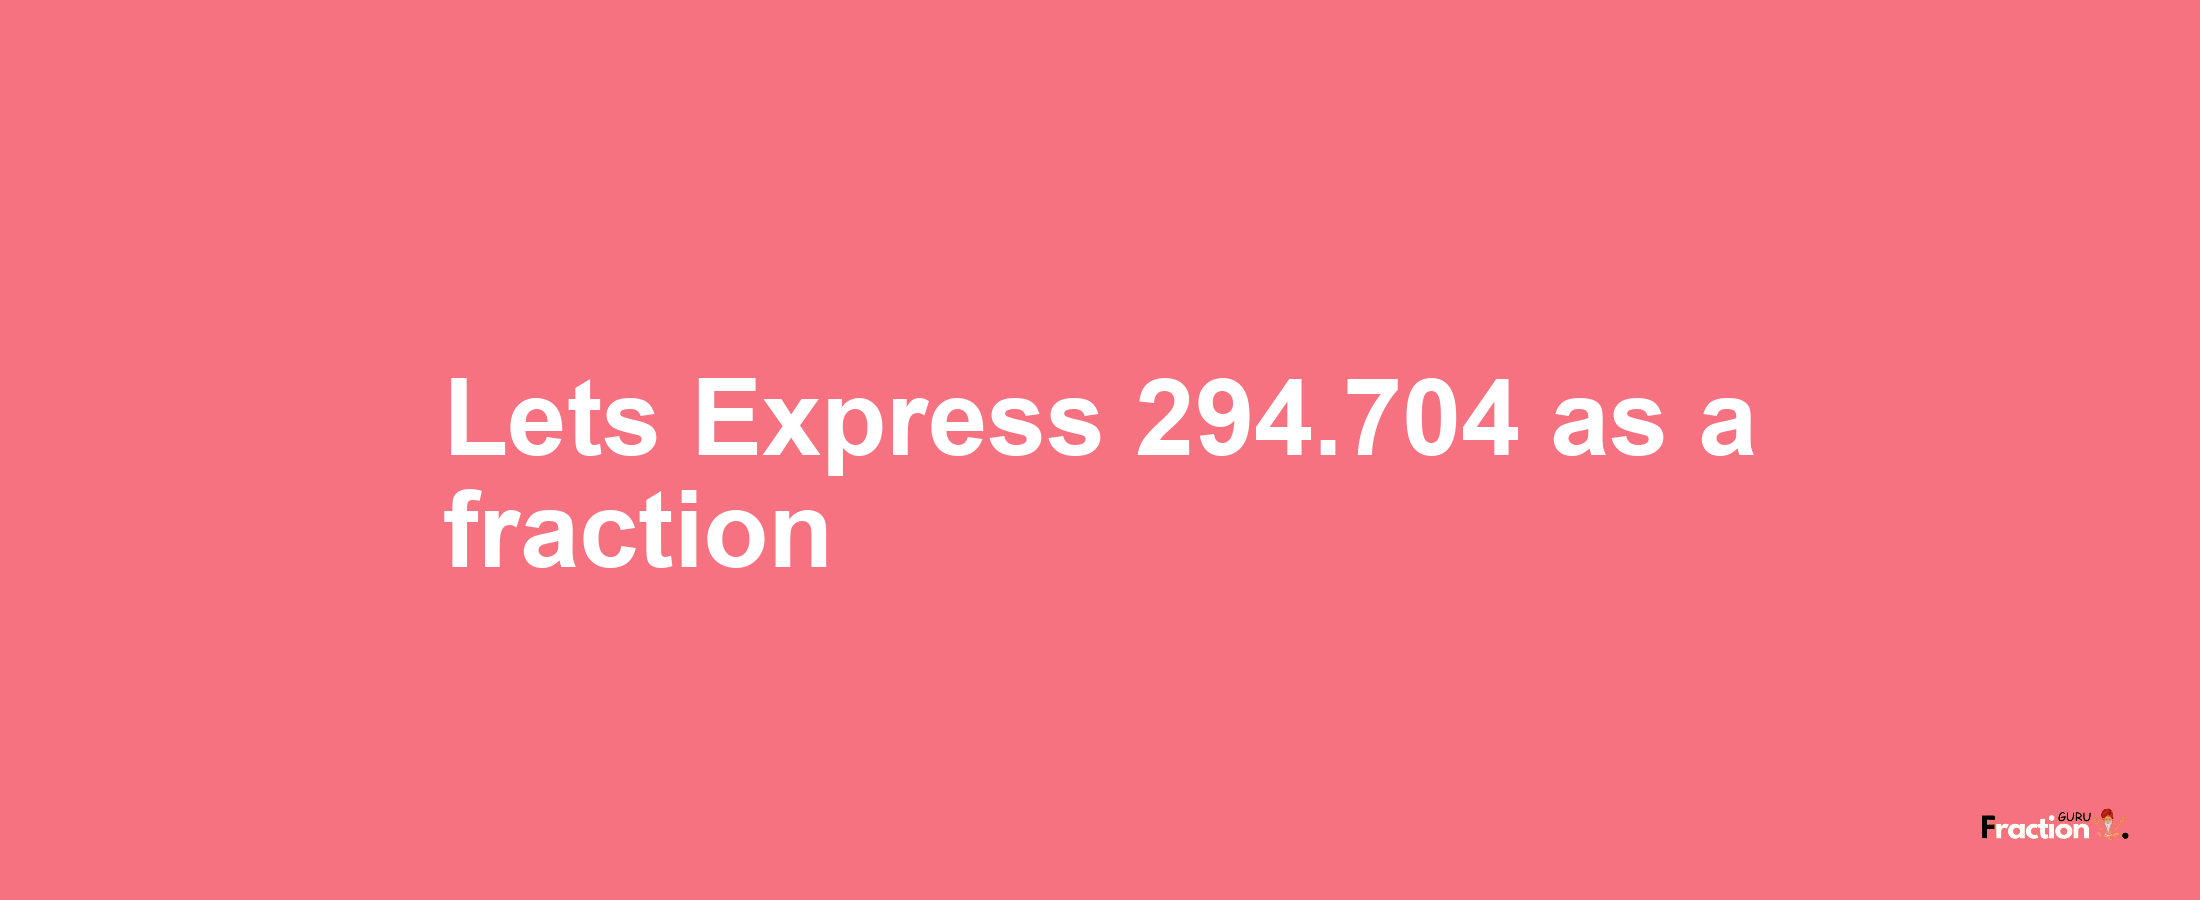 Lets Express 294.704 as afraction